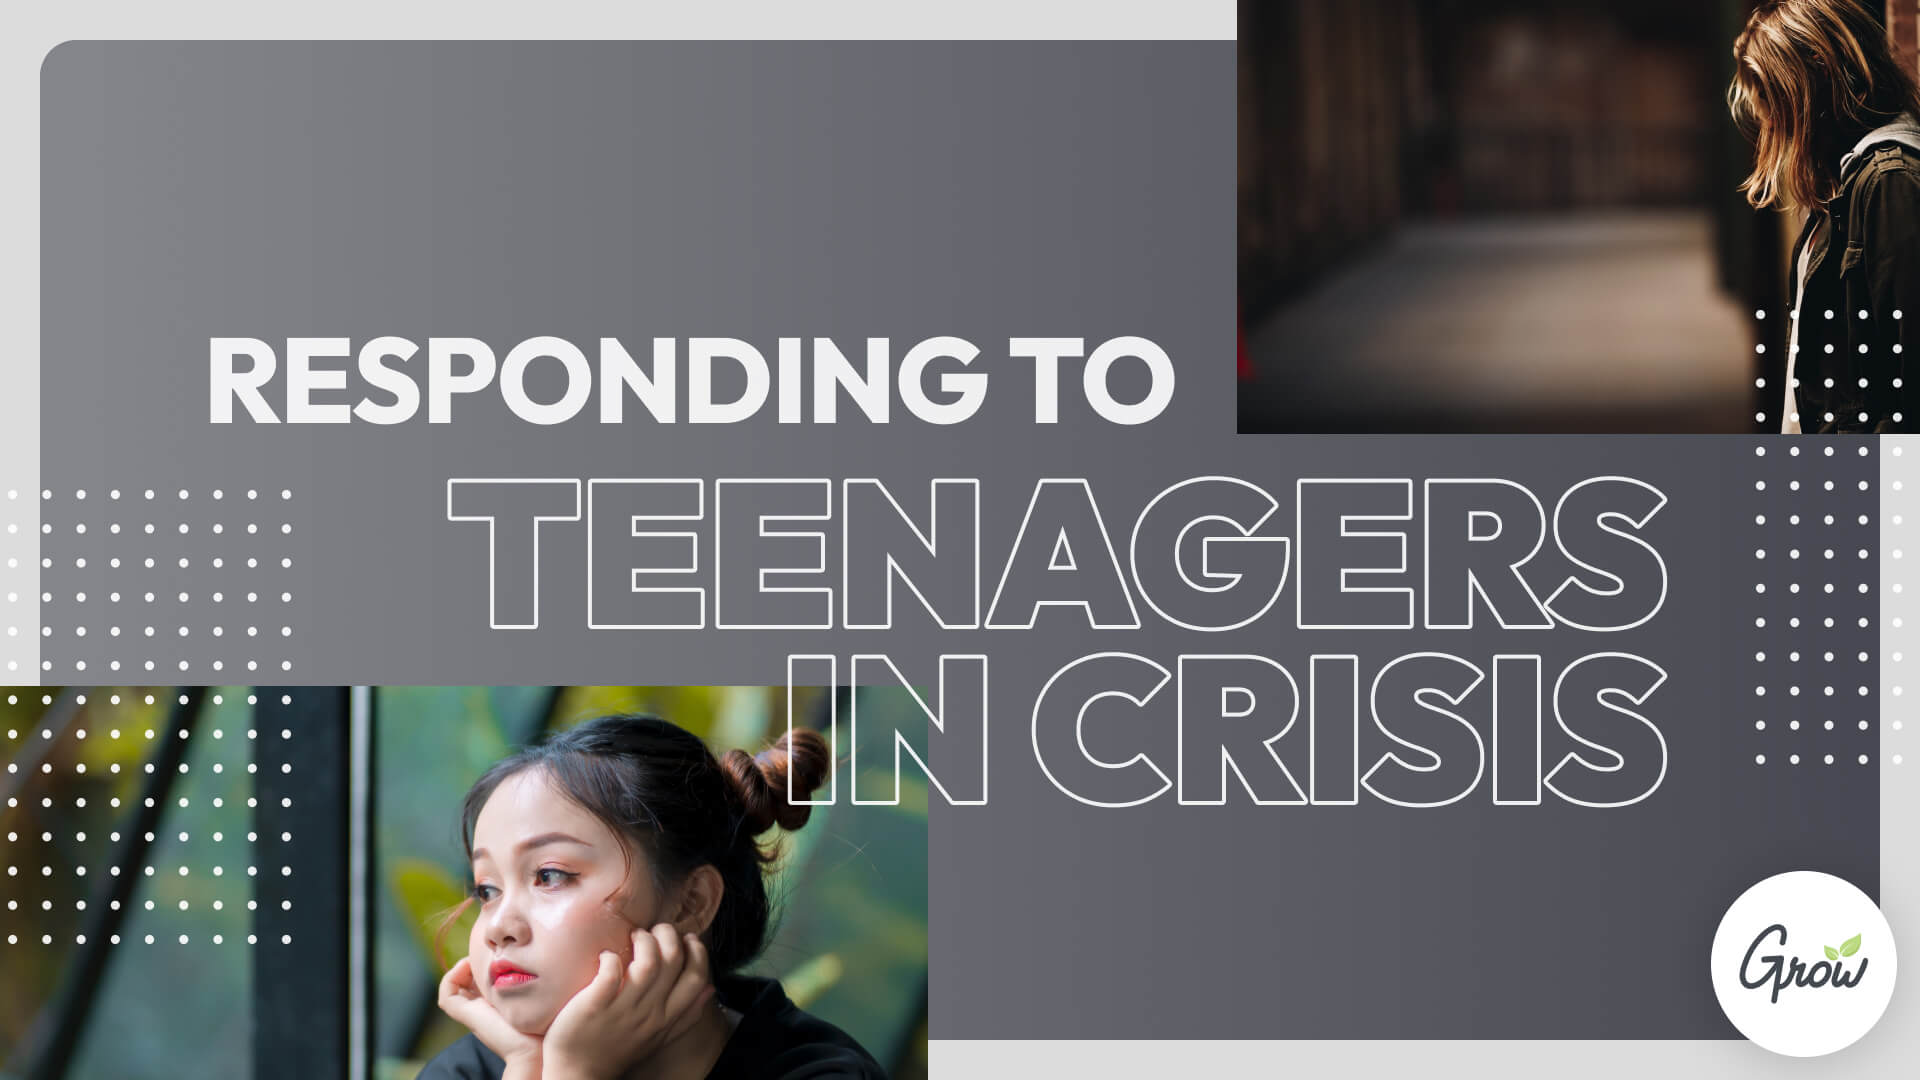 Responding to Teenagers in Crisis